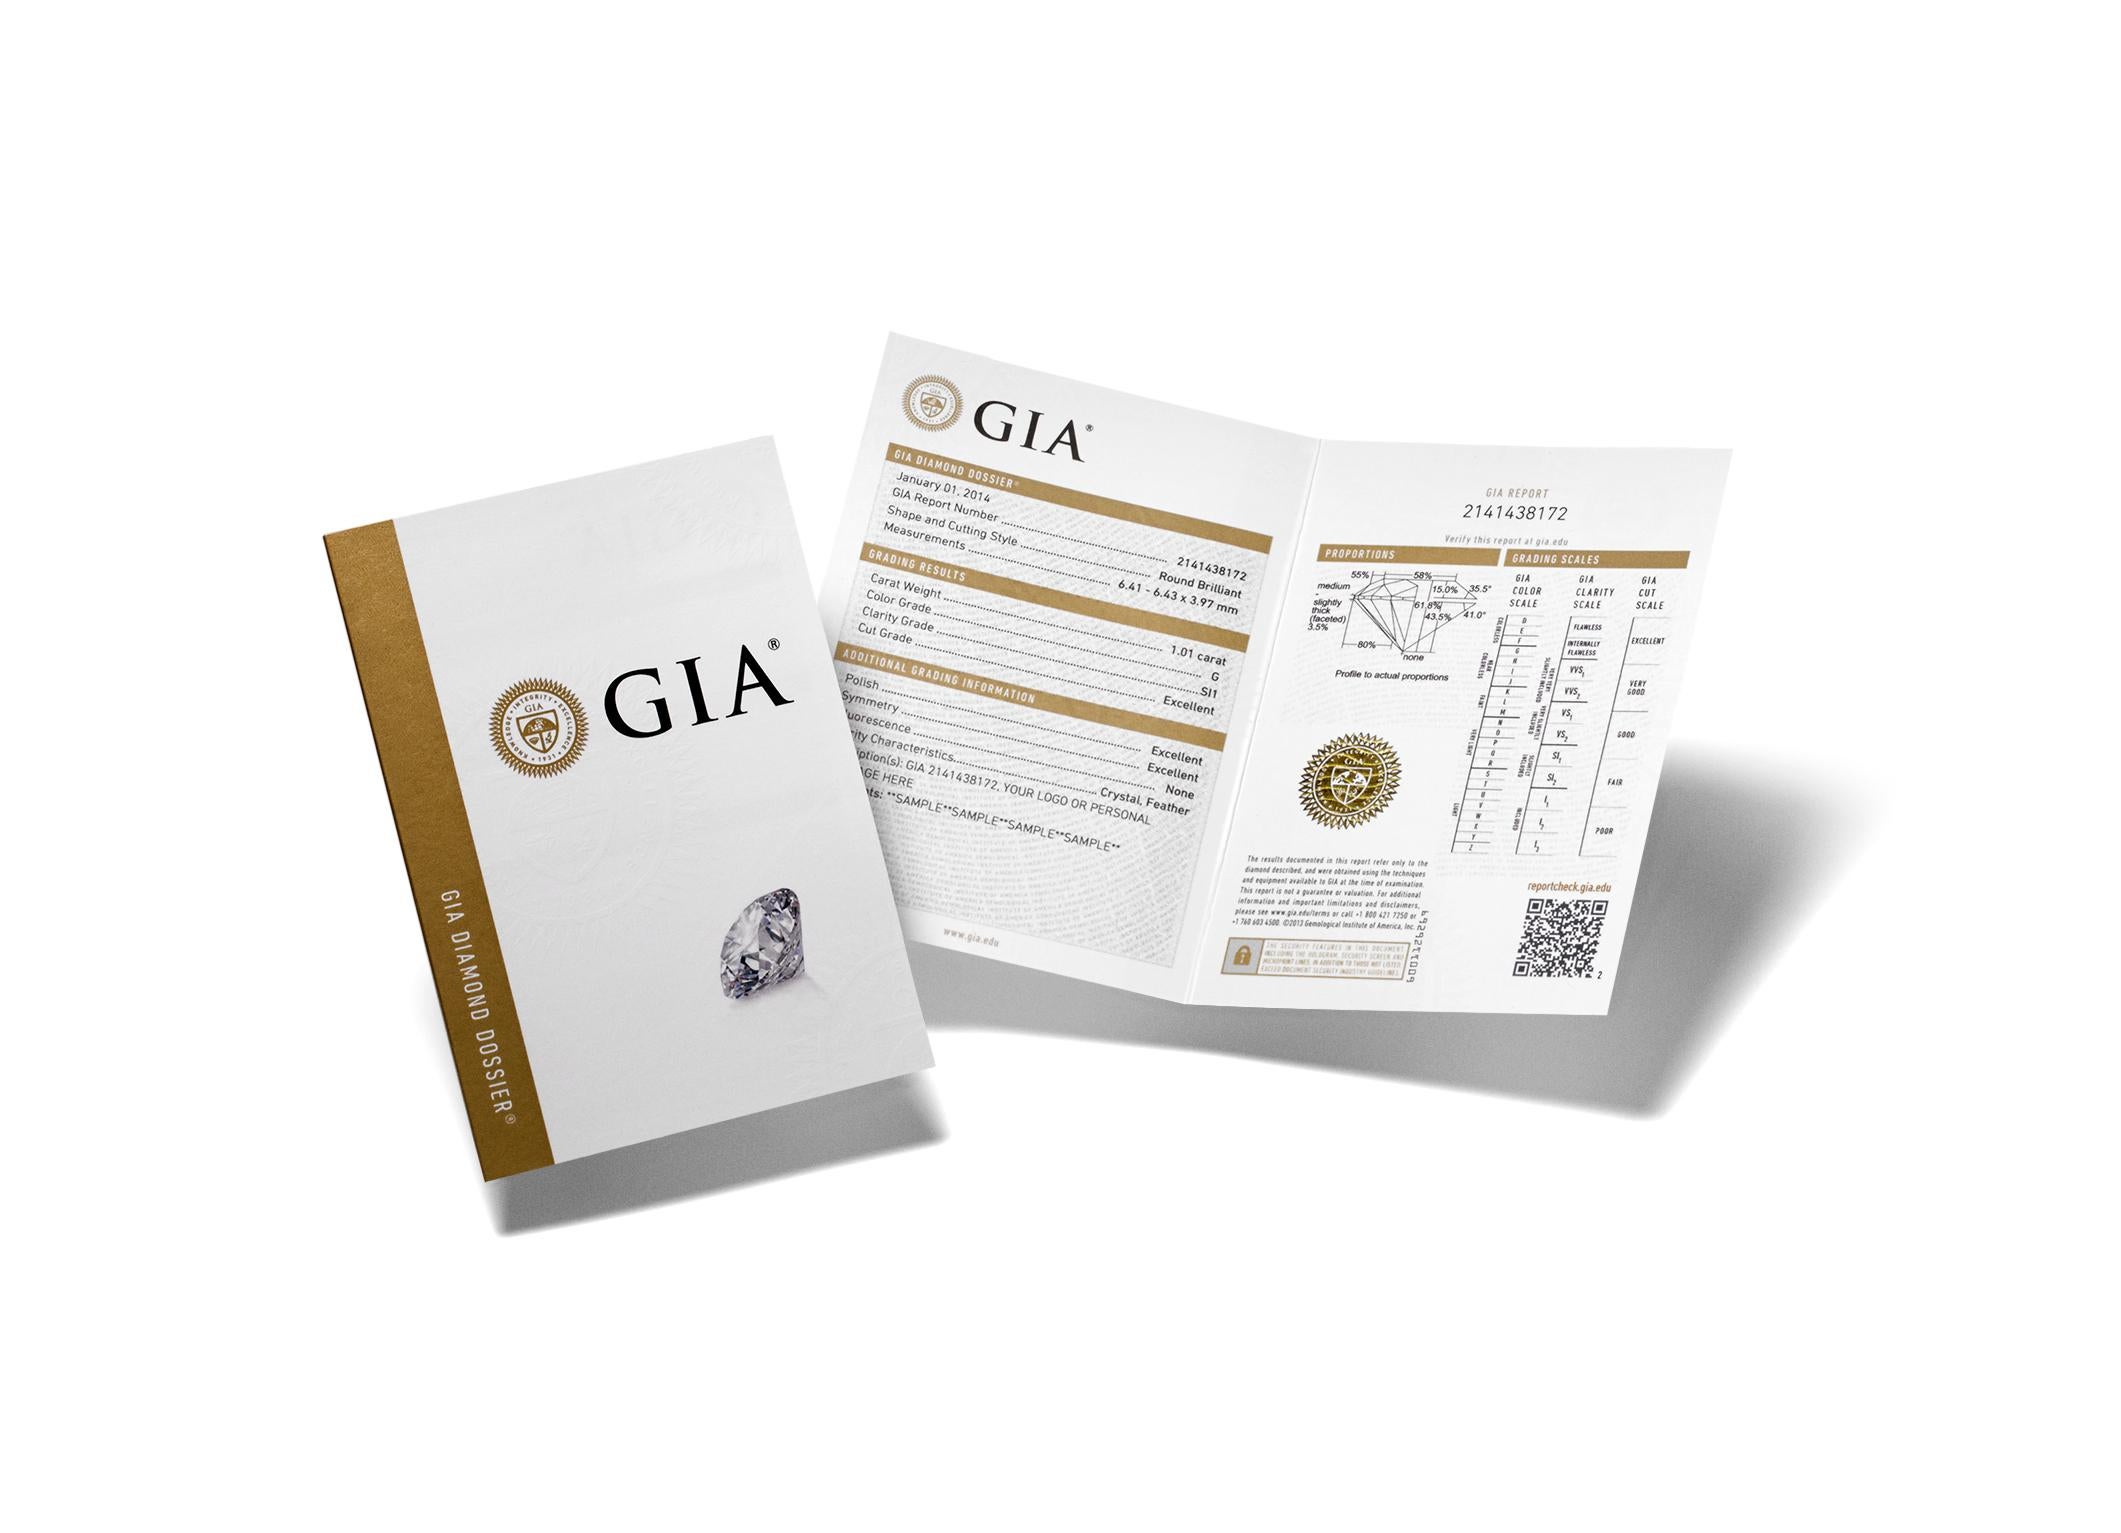 GIA Certified 0.50 Carat, E/VVS2, Brilliant Cut, Excellent Natural Diamond

Perfect Brilliants for perfect gifts.

5 C's:
Certificate: GIA
Carat: 0.50ct
Color: E
Clarity: VVS2(Very Very Slightly Included)
Cut: Excellent

Polish: Excellent
Symmetry: